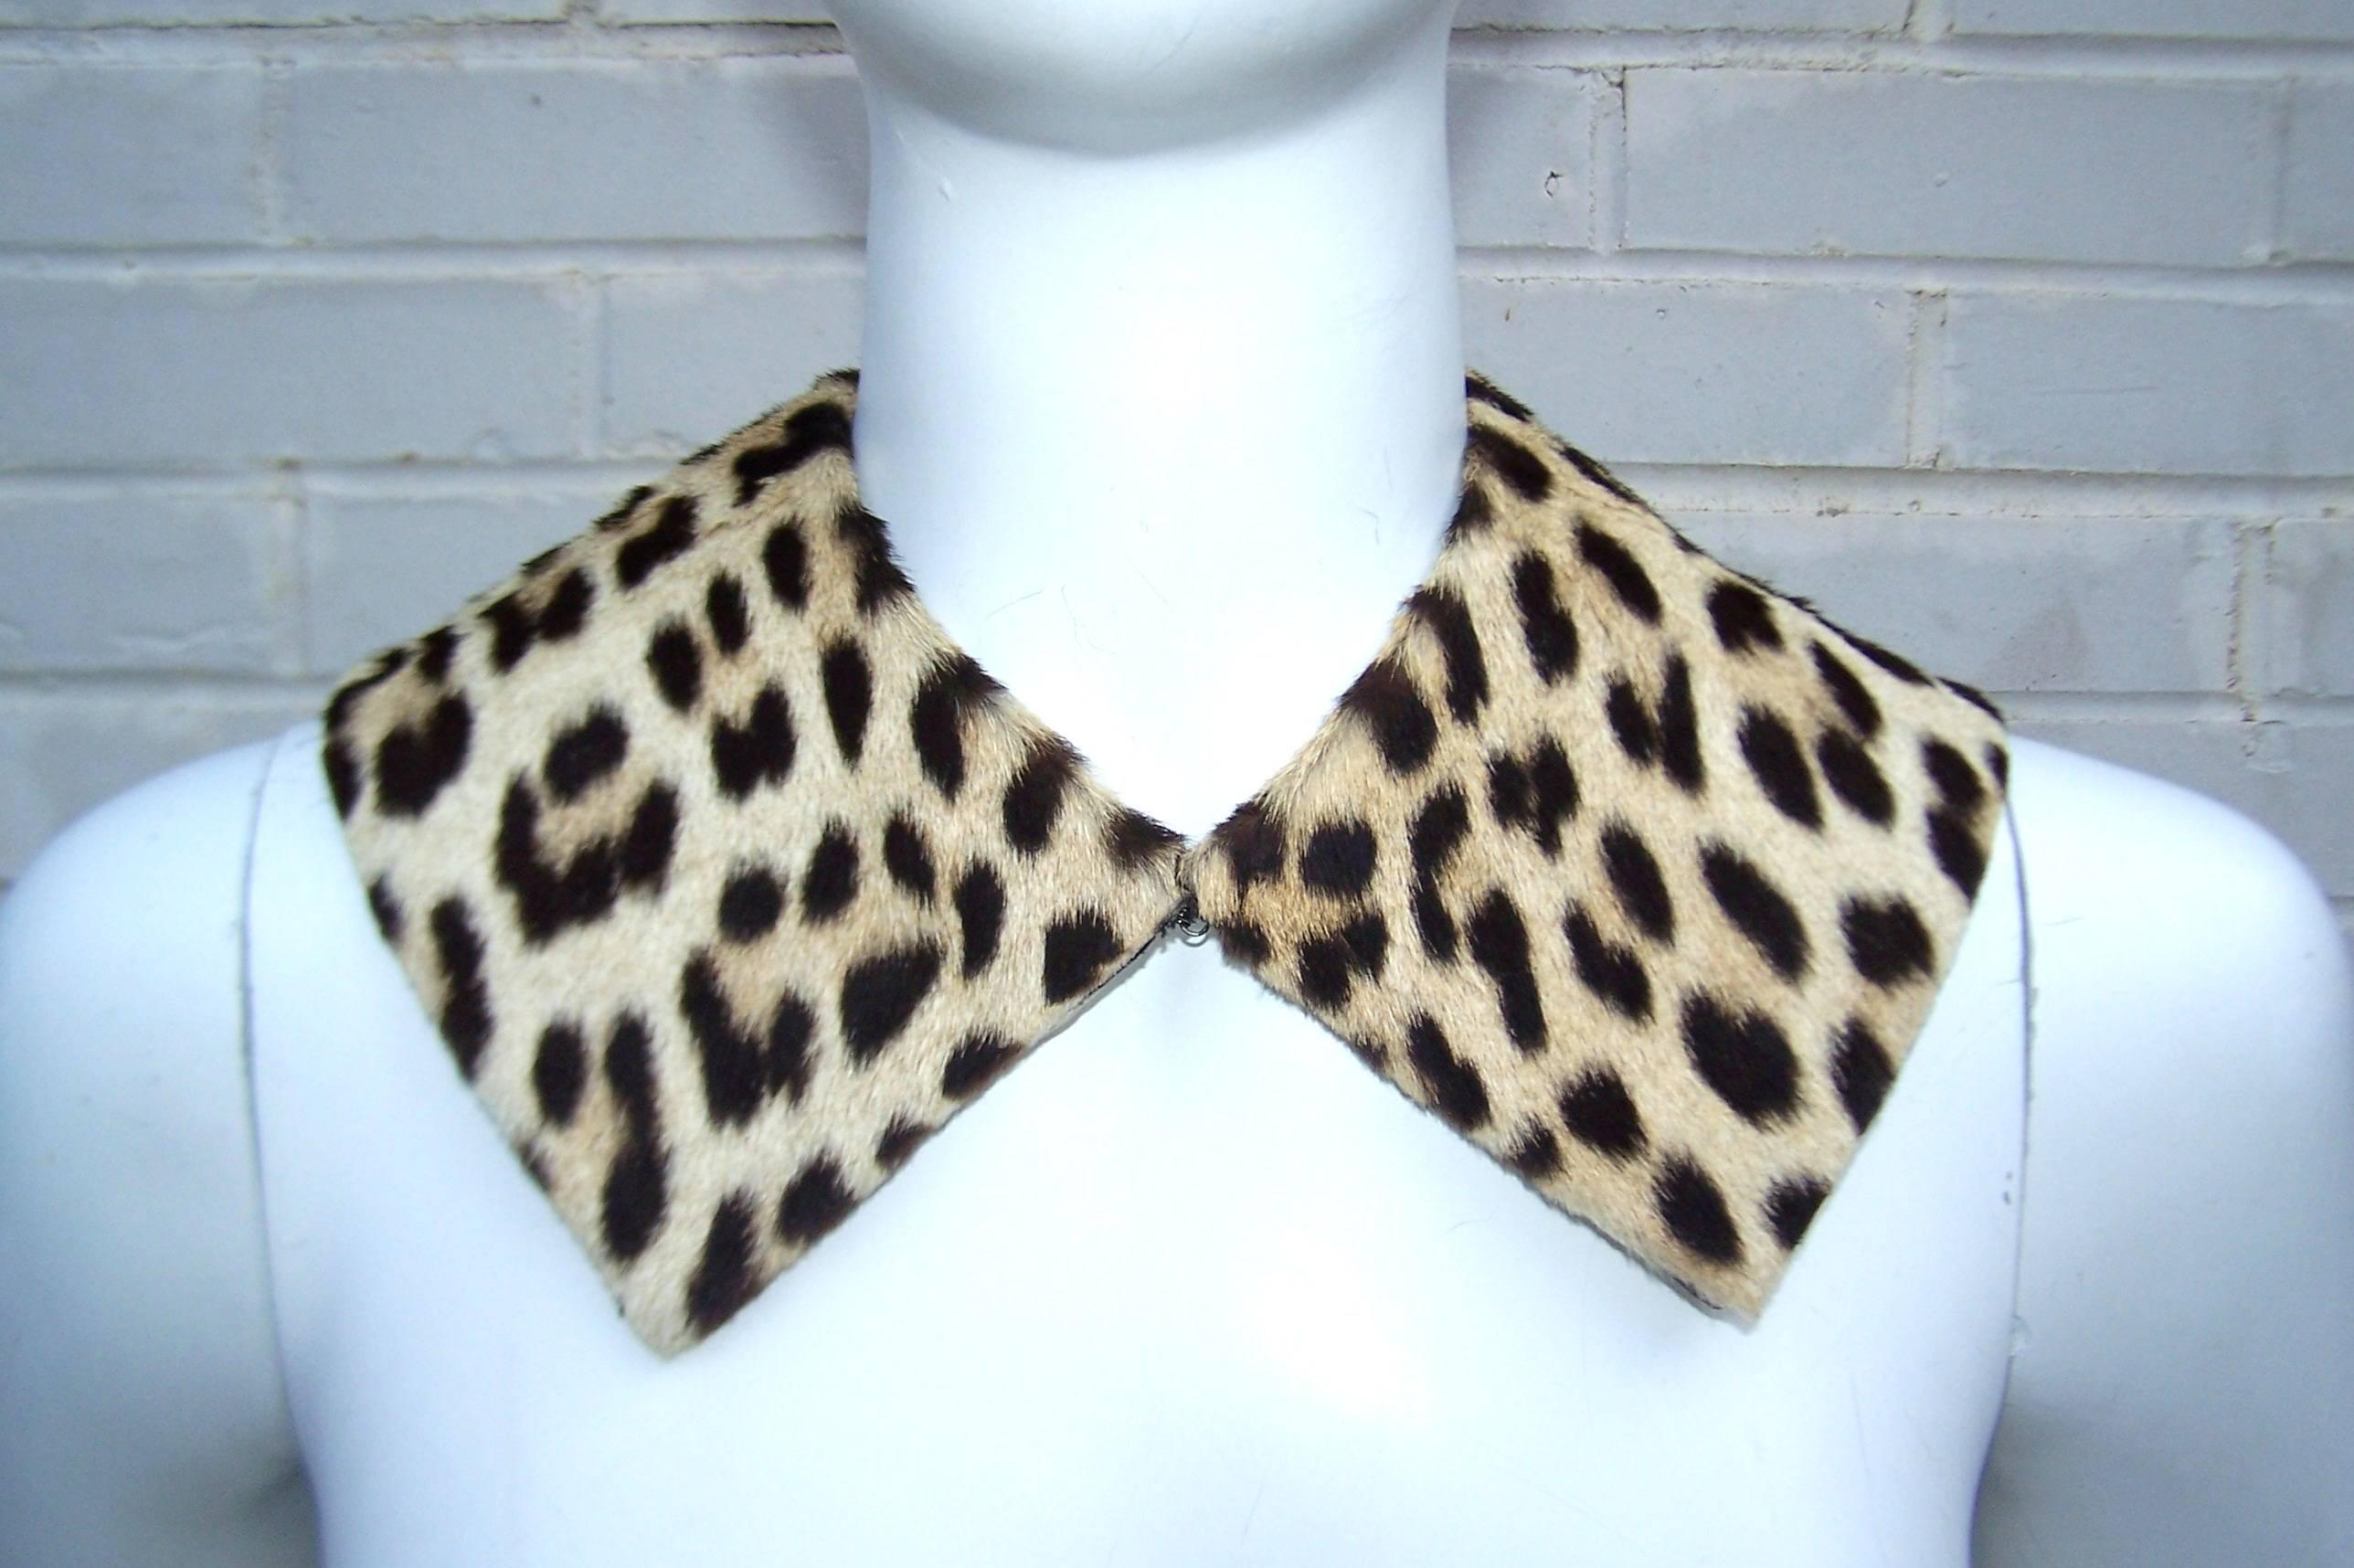 Add an exotic flavor to a coat, sweater, dress or jacket with this 1950's leopard print fur collar.  The collar hooks at the front and has a satin backing.  It can be worn like a necklace or stitch it onto a coat collar for a more permanent look. 